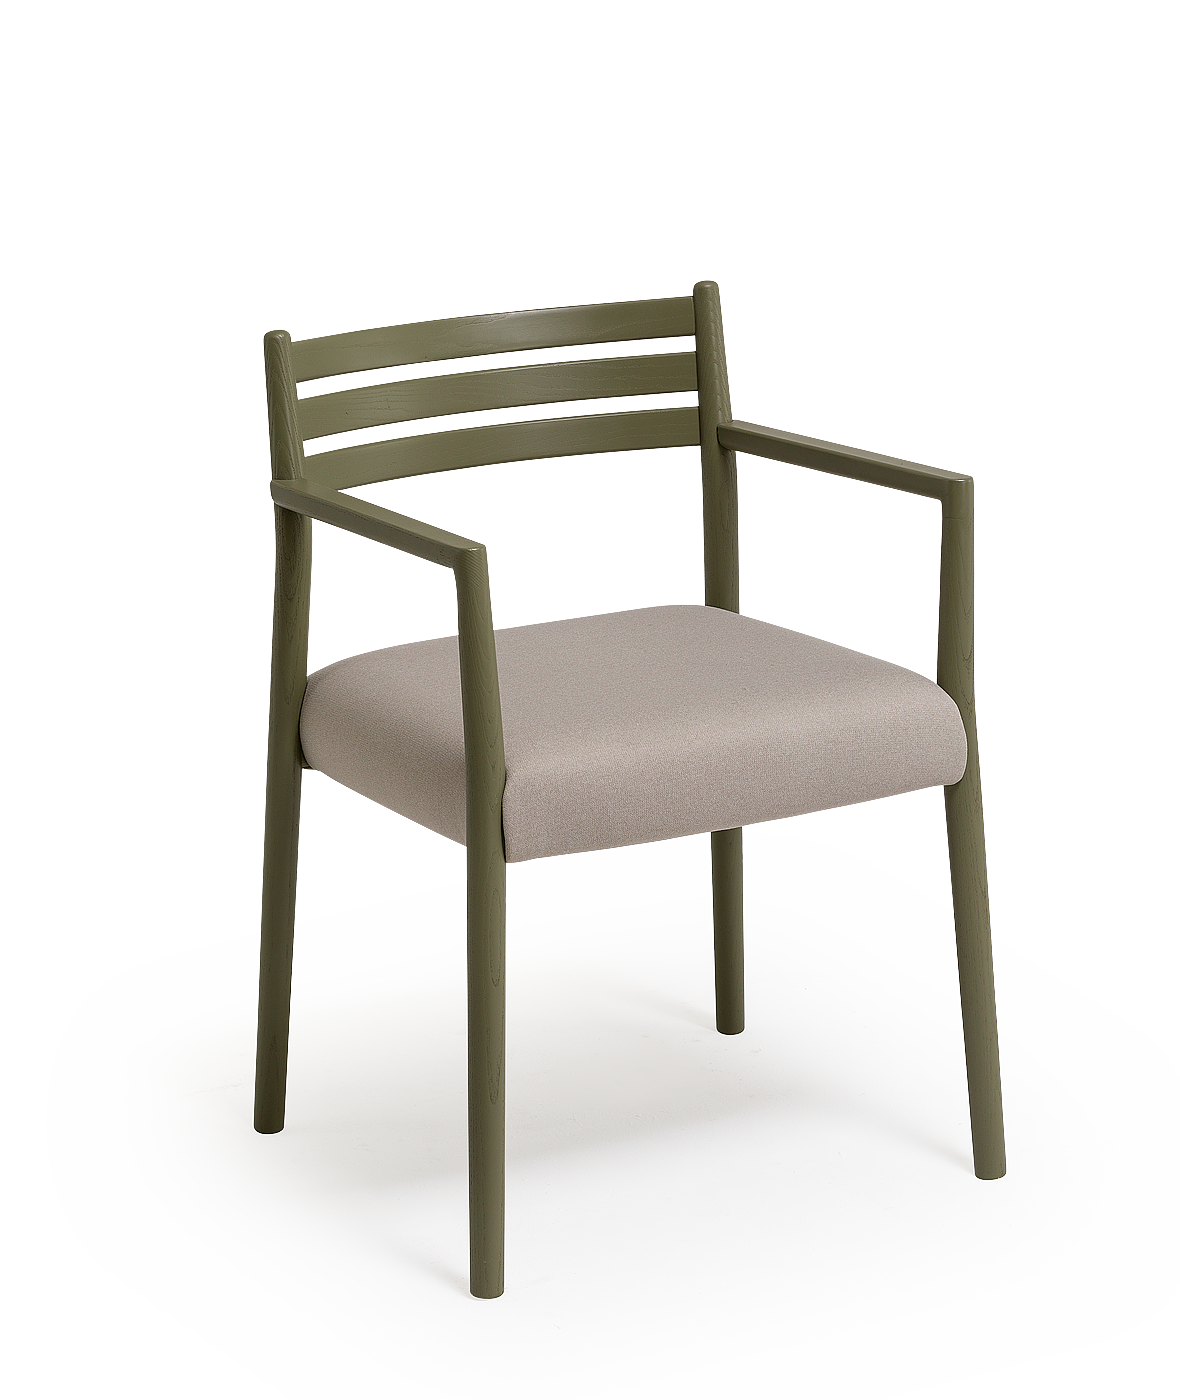 Vergés - Bogart chair with armrests and upholstered seat and backrest